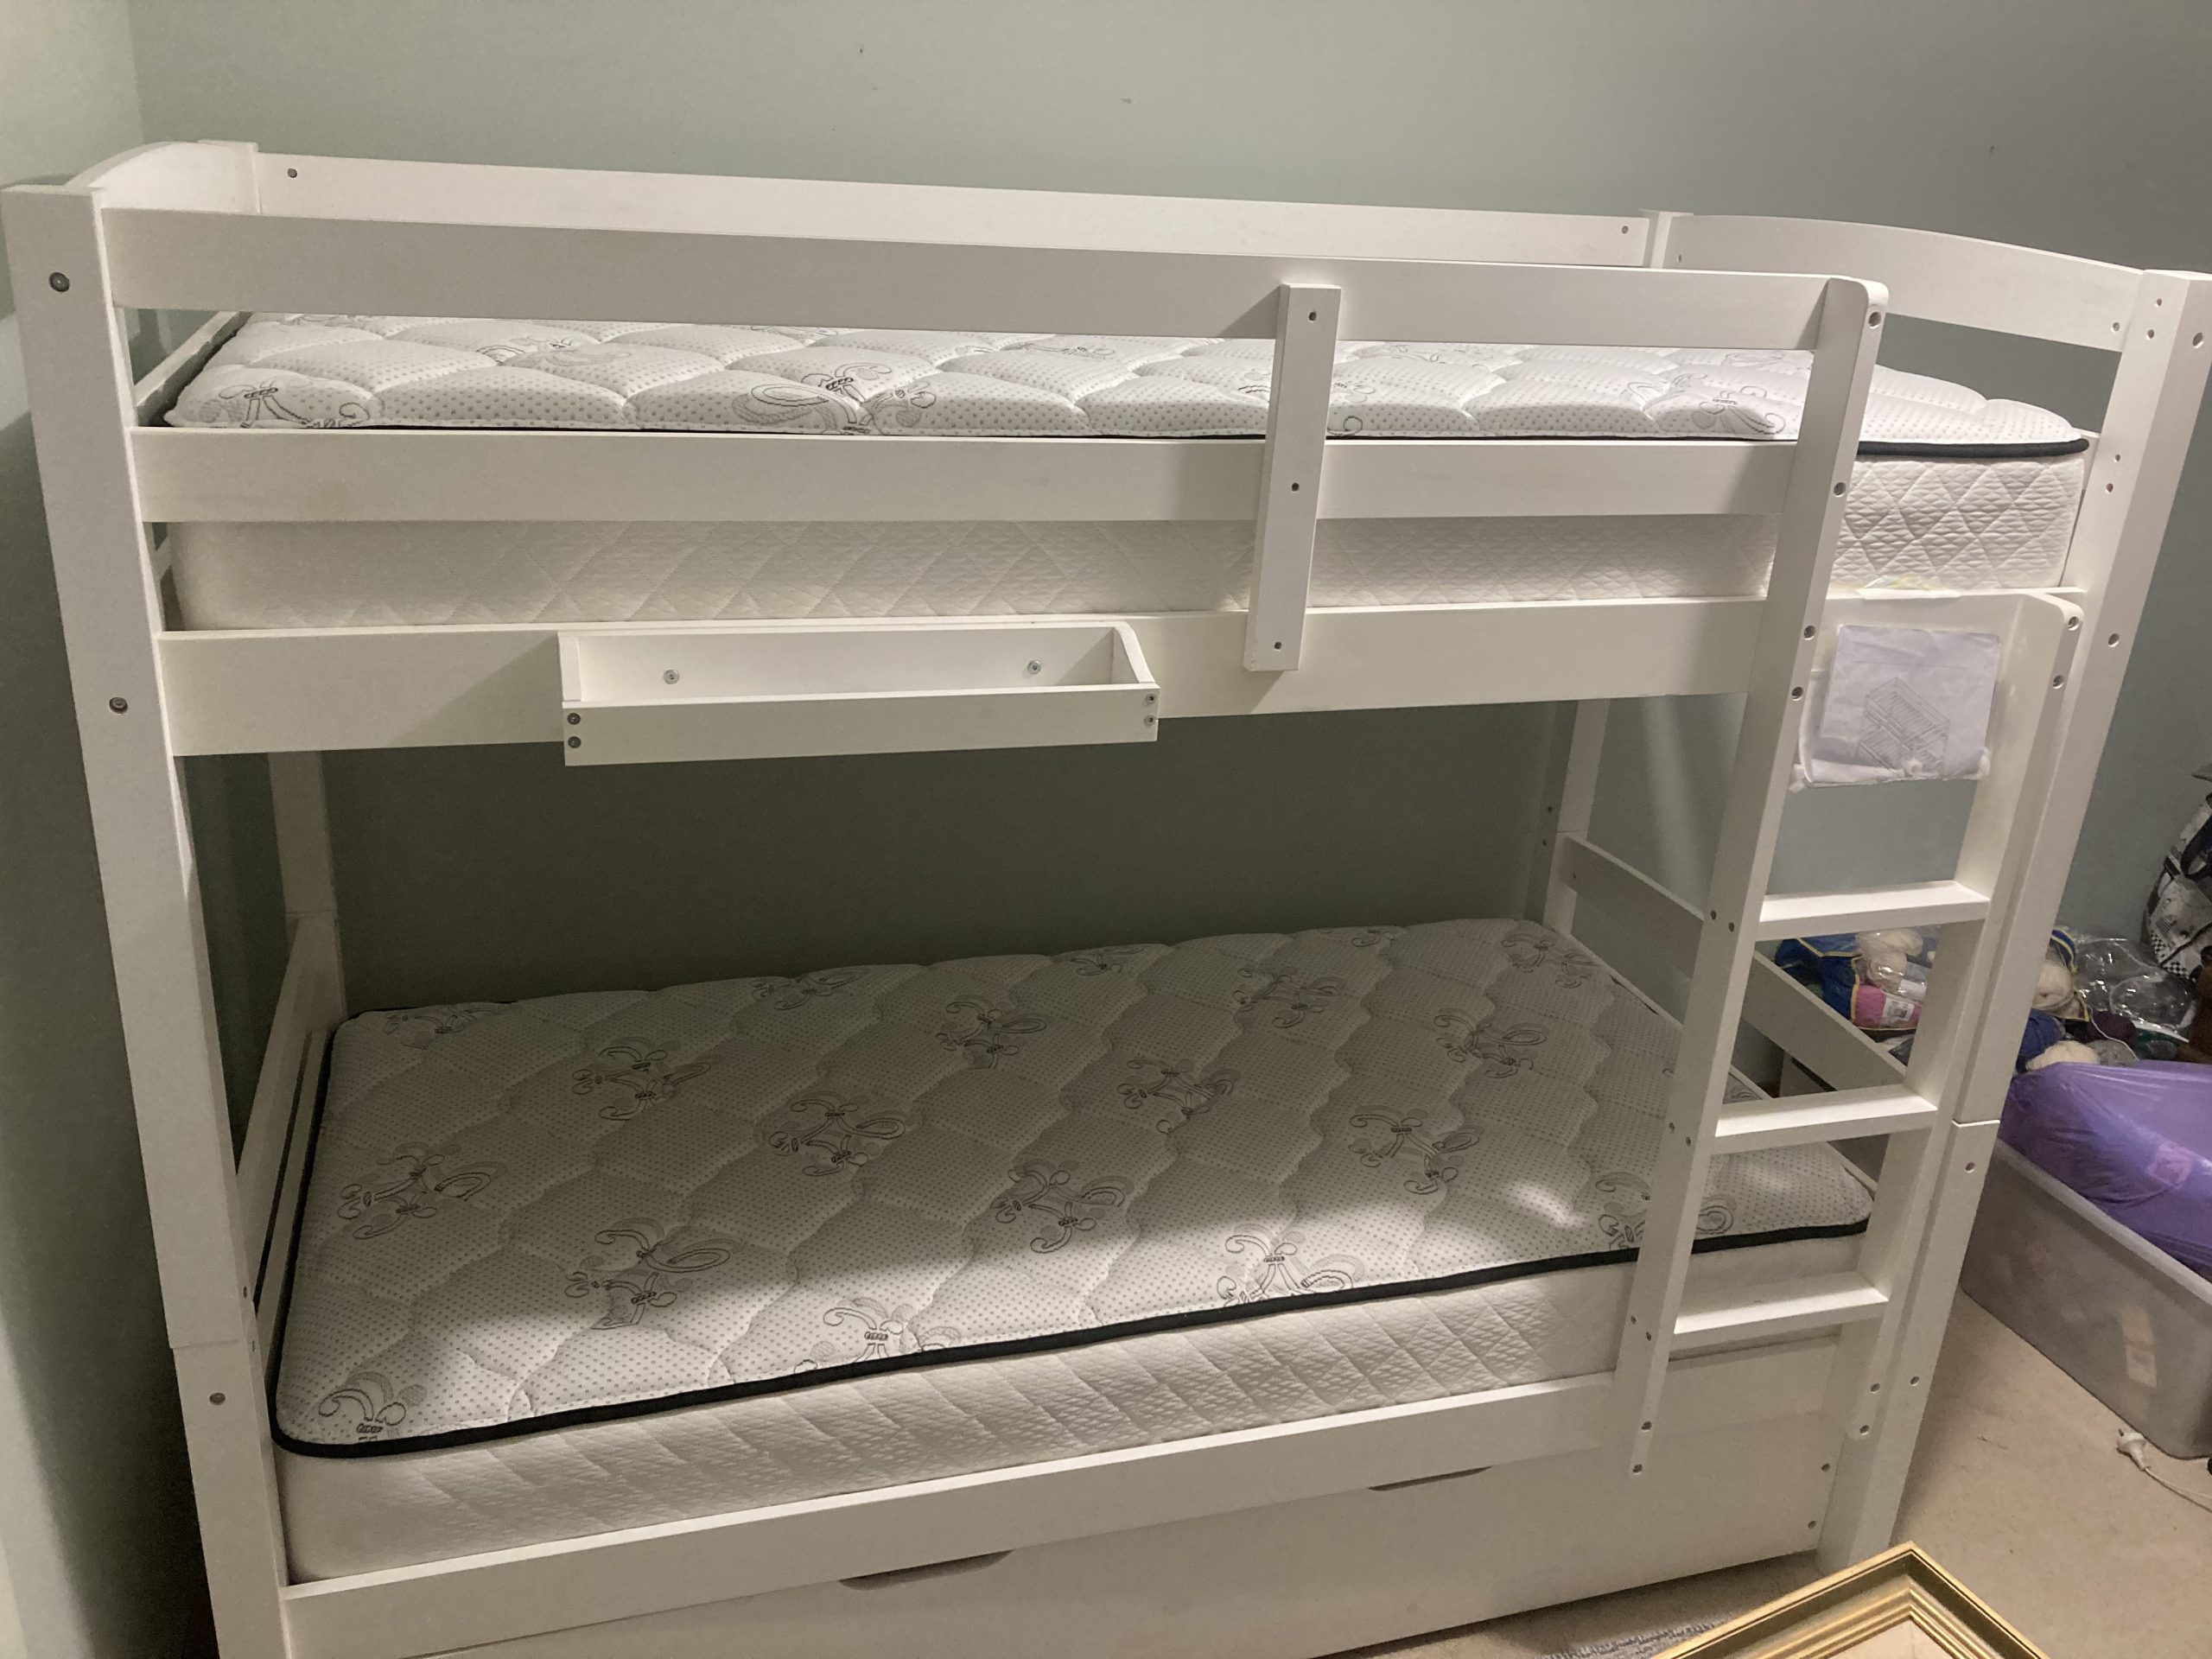 Children’s Bunks and trundle